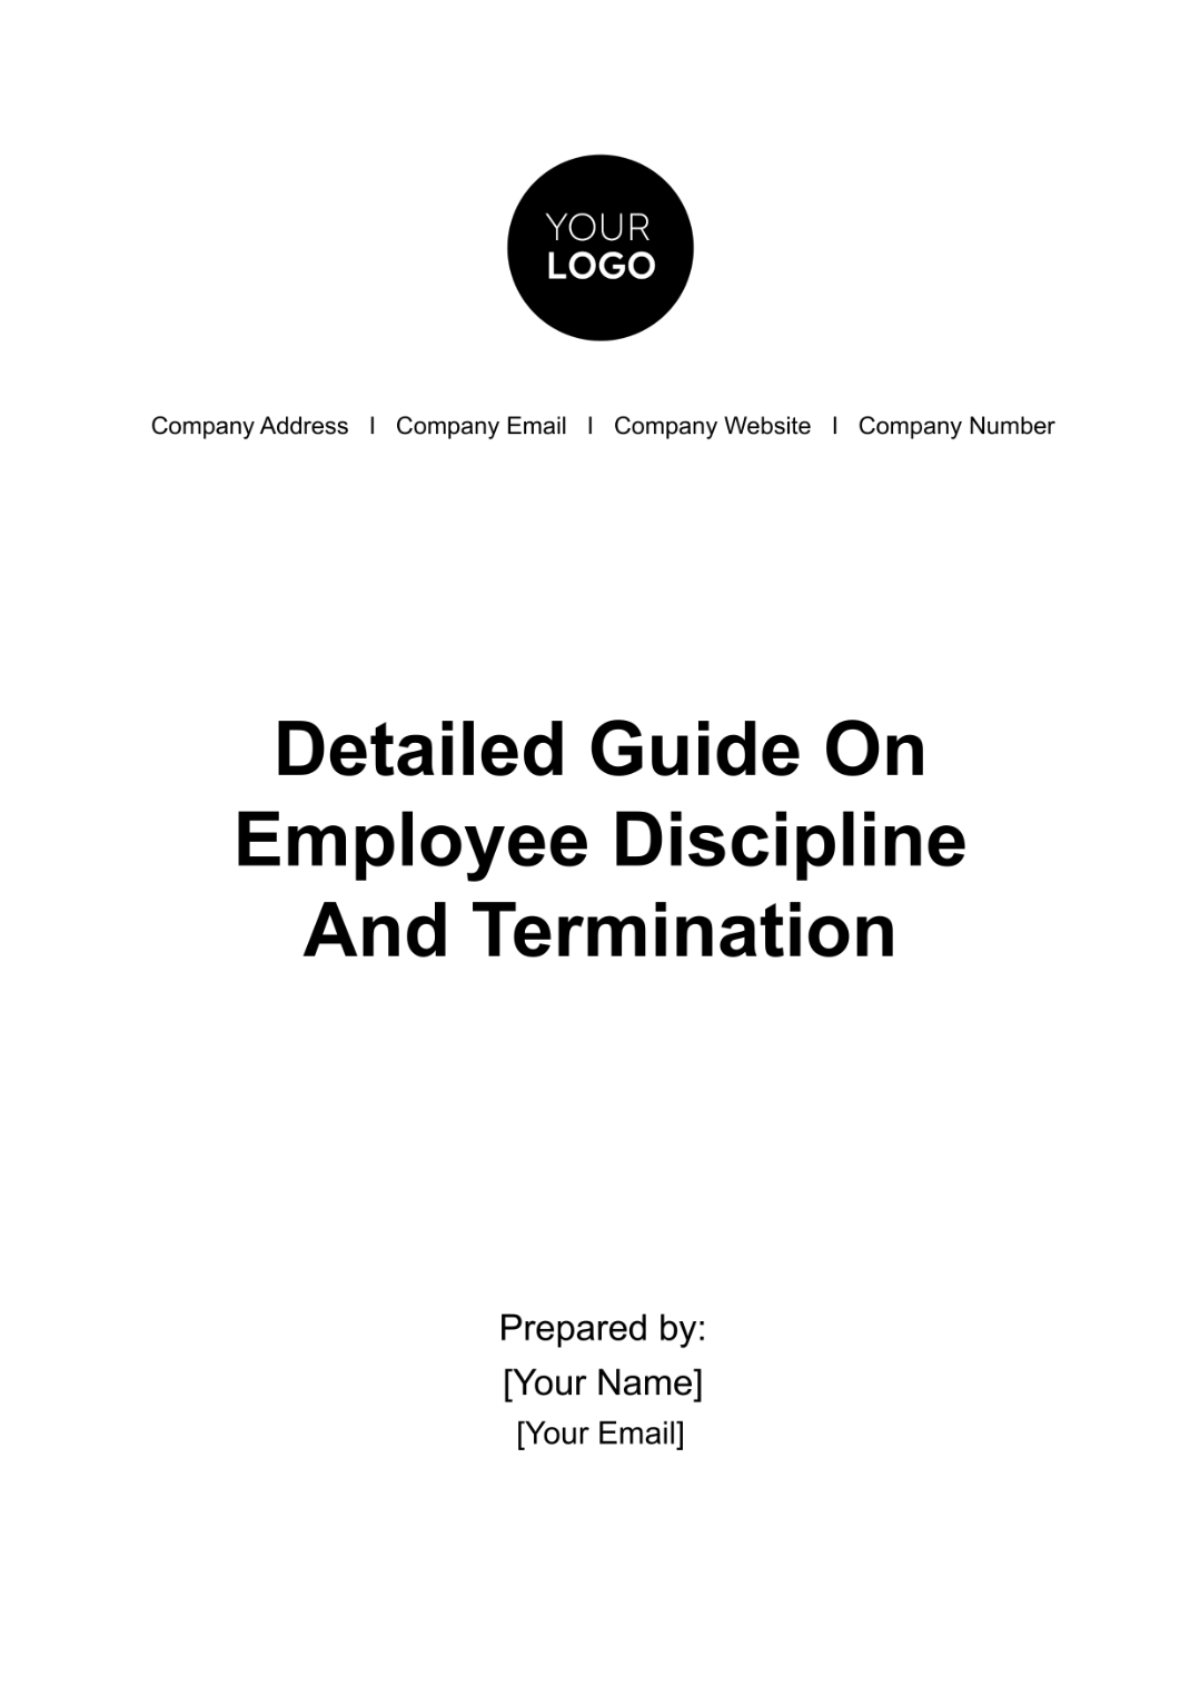 Free Detailed Guide on Employee Discipline and Termination HR Template